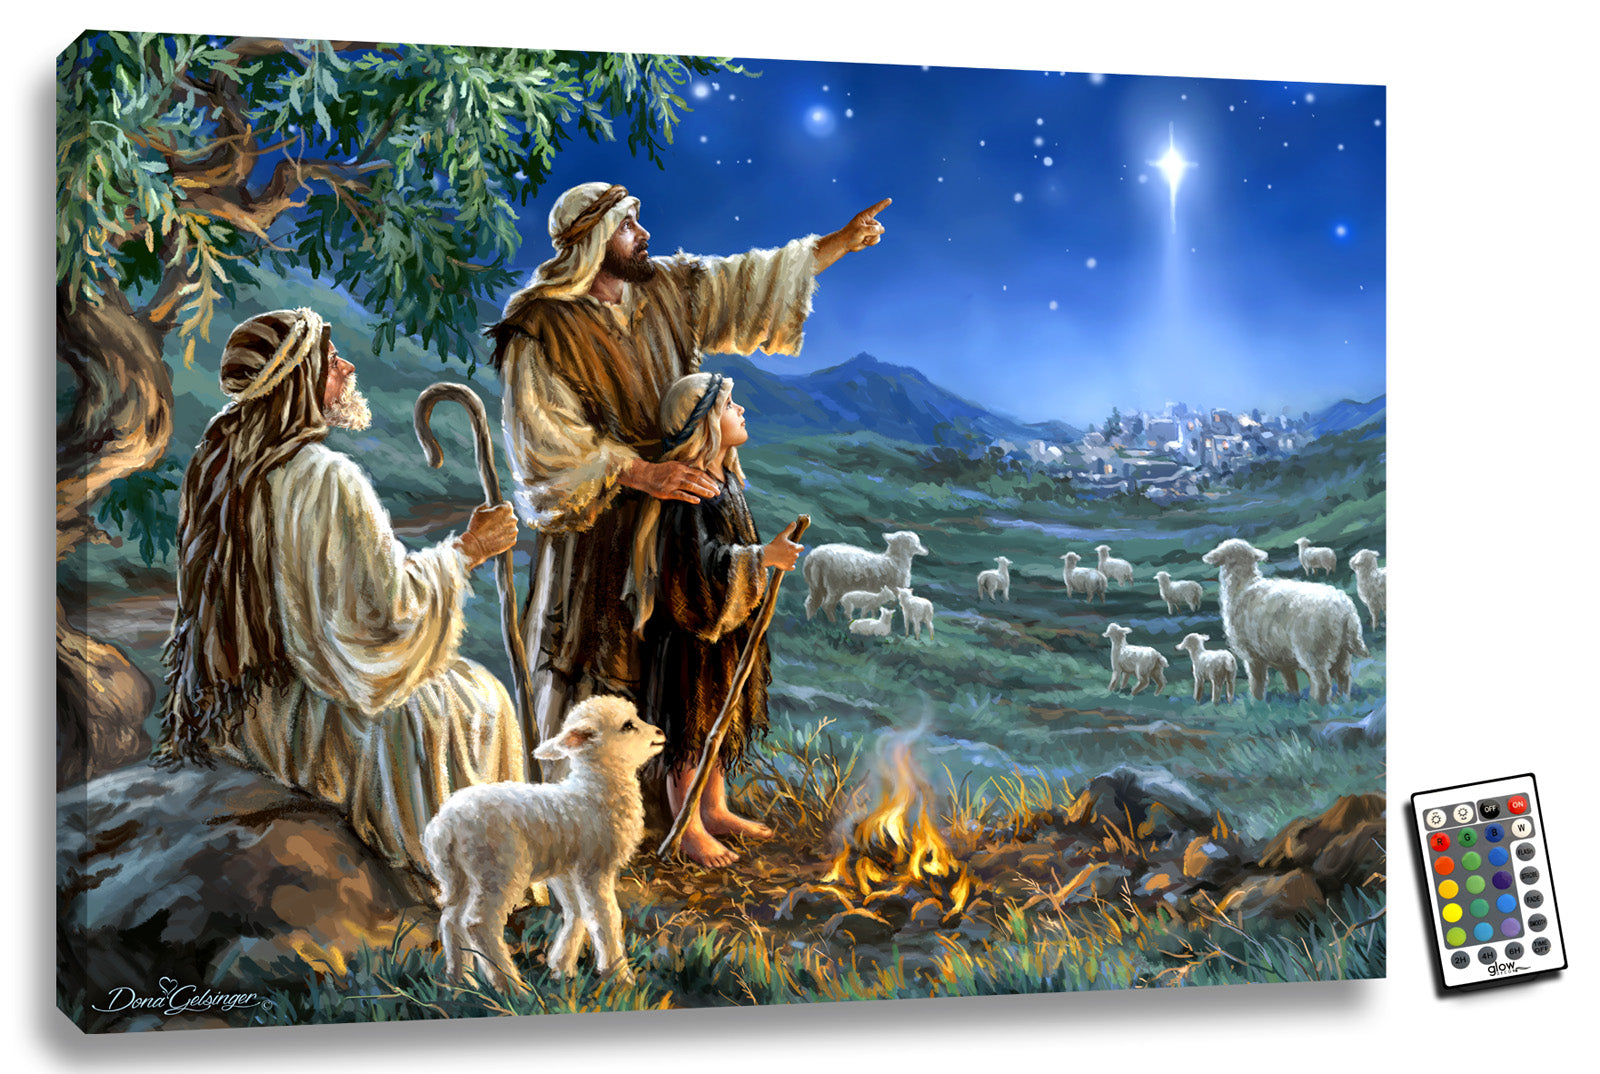 This stunning piece features three generations of shepherds gathered around a cozy fire, with a sweet lamb by their side. As they tend to their flock in the peaceful countryside, one of the wise shepherds points towards a shining star that illuminates the night sky, leading the way to the birthplace of Jesus.